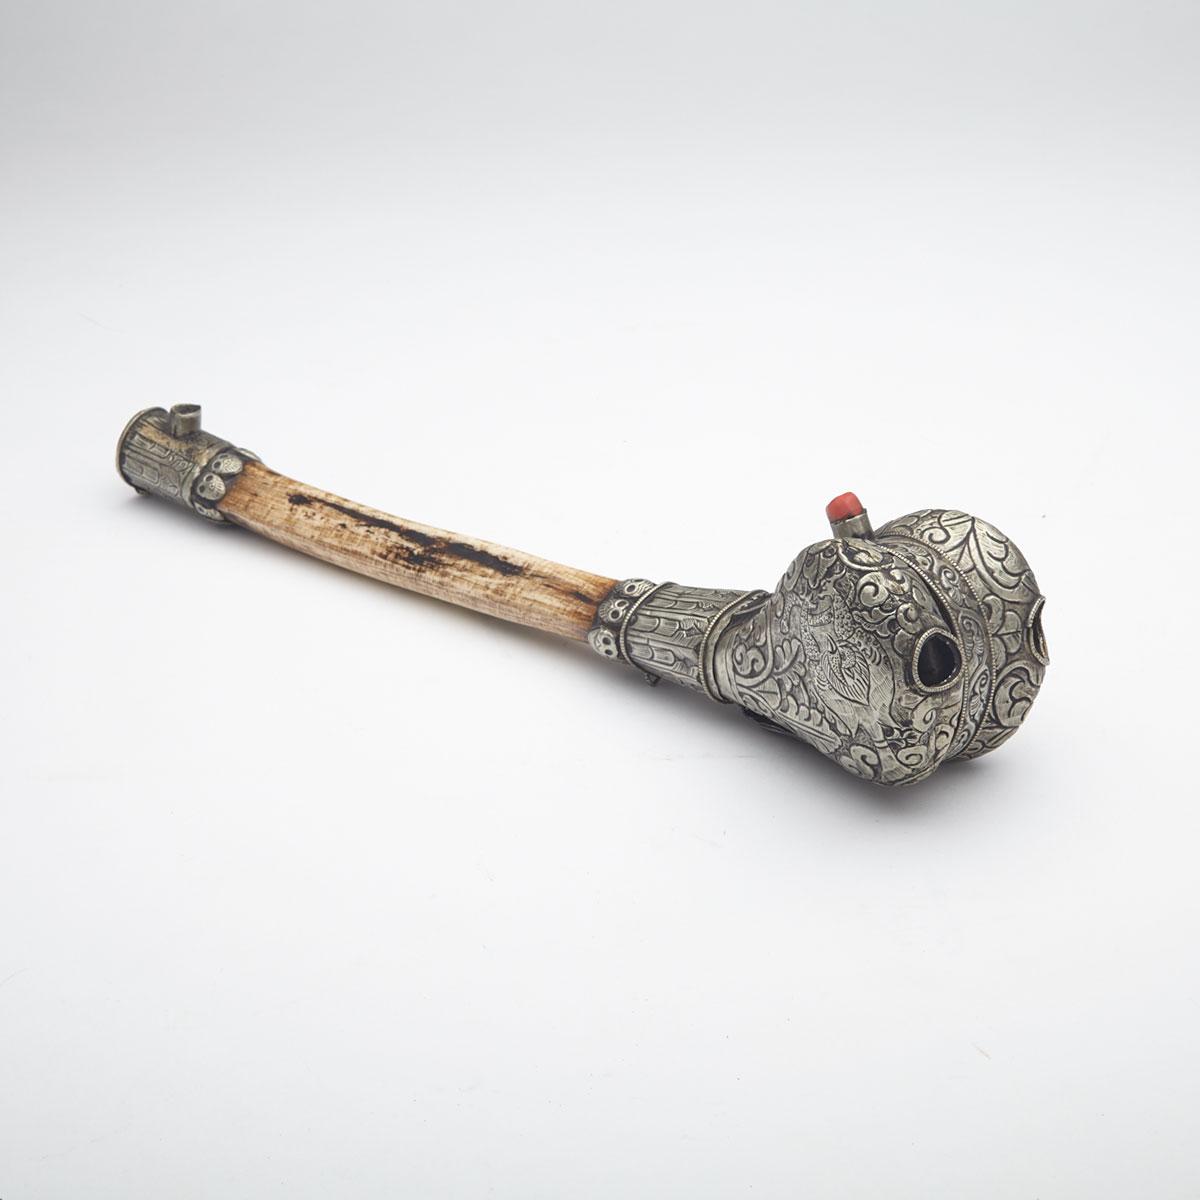 Tibetan Silver and Coral Mounted Kangling Thighbone Trumpet, early 20th century